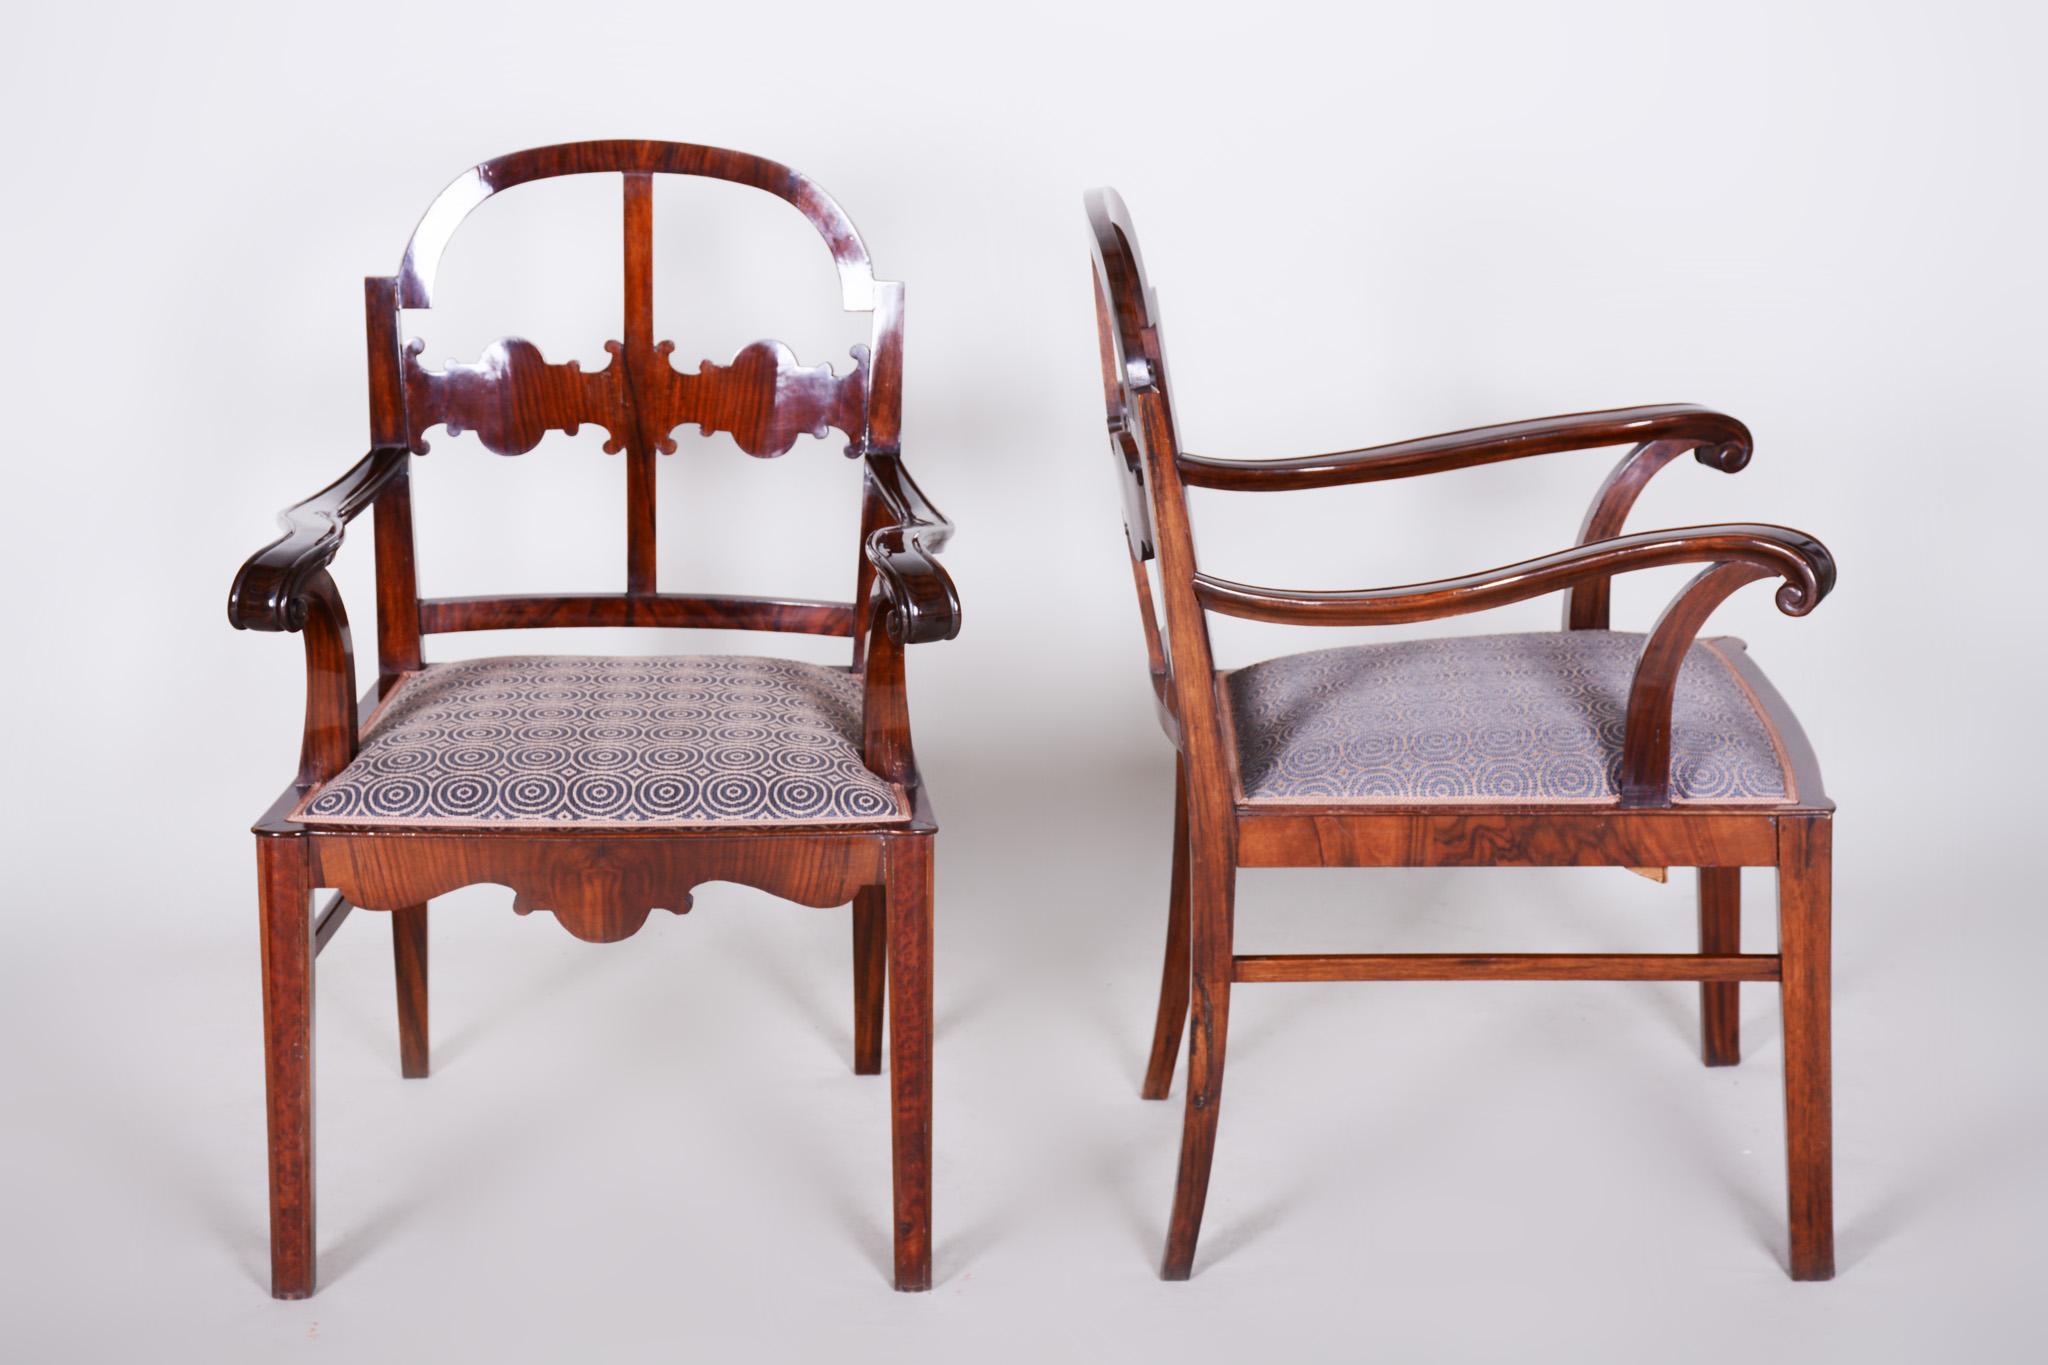 Walnut Art Deco Seating Set, 2 Armchairs and 4 Chairs, Shellac Polish, 1920s For Sale 4